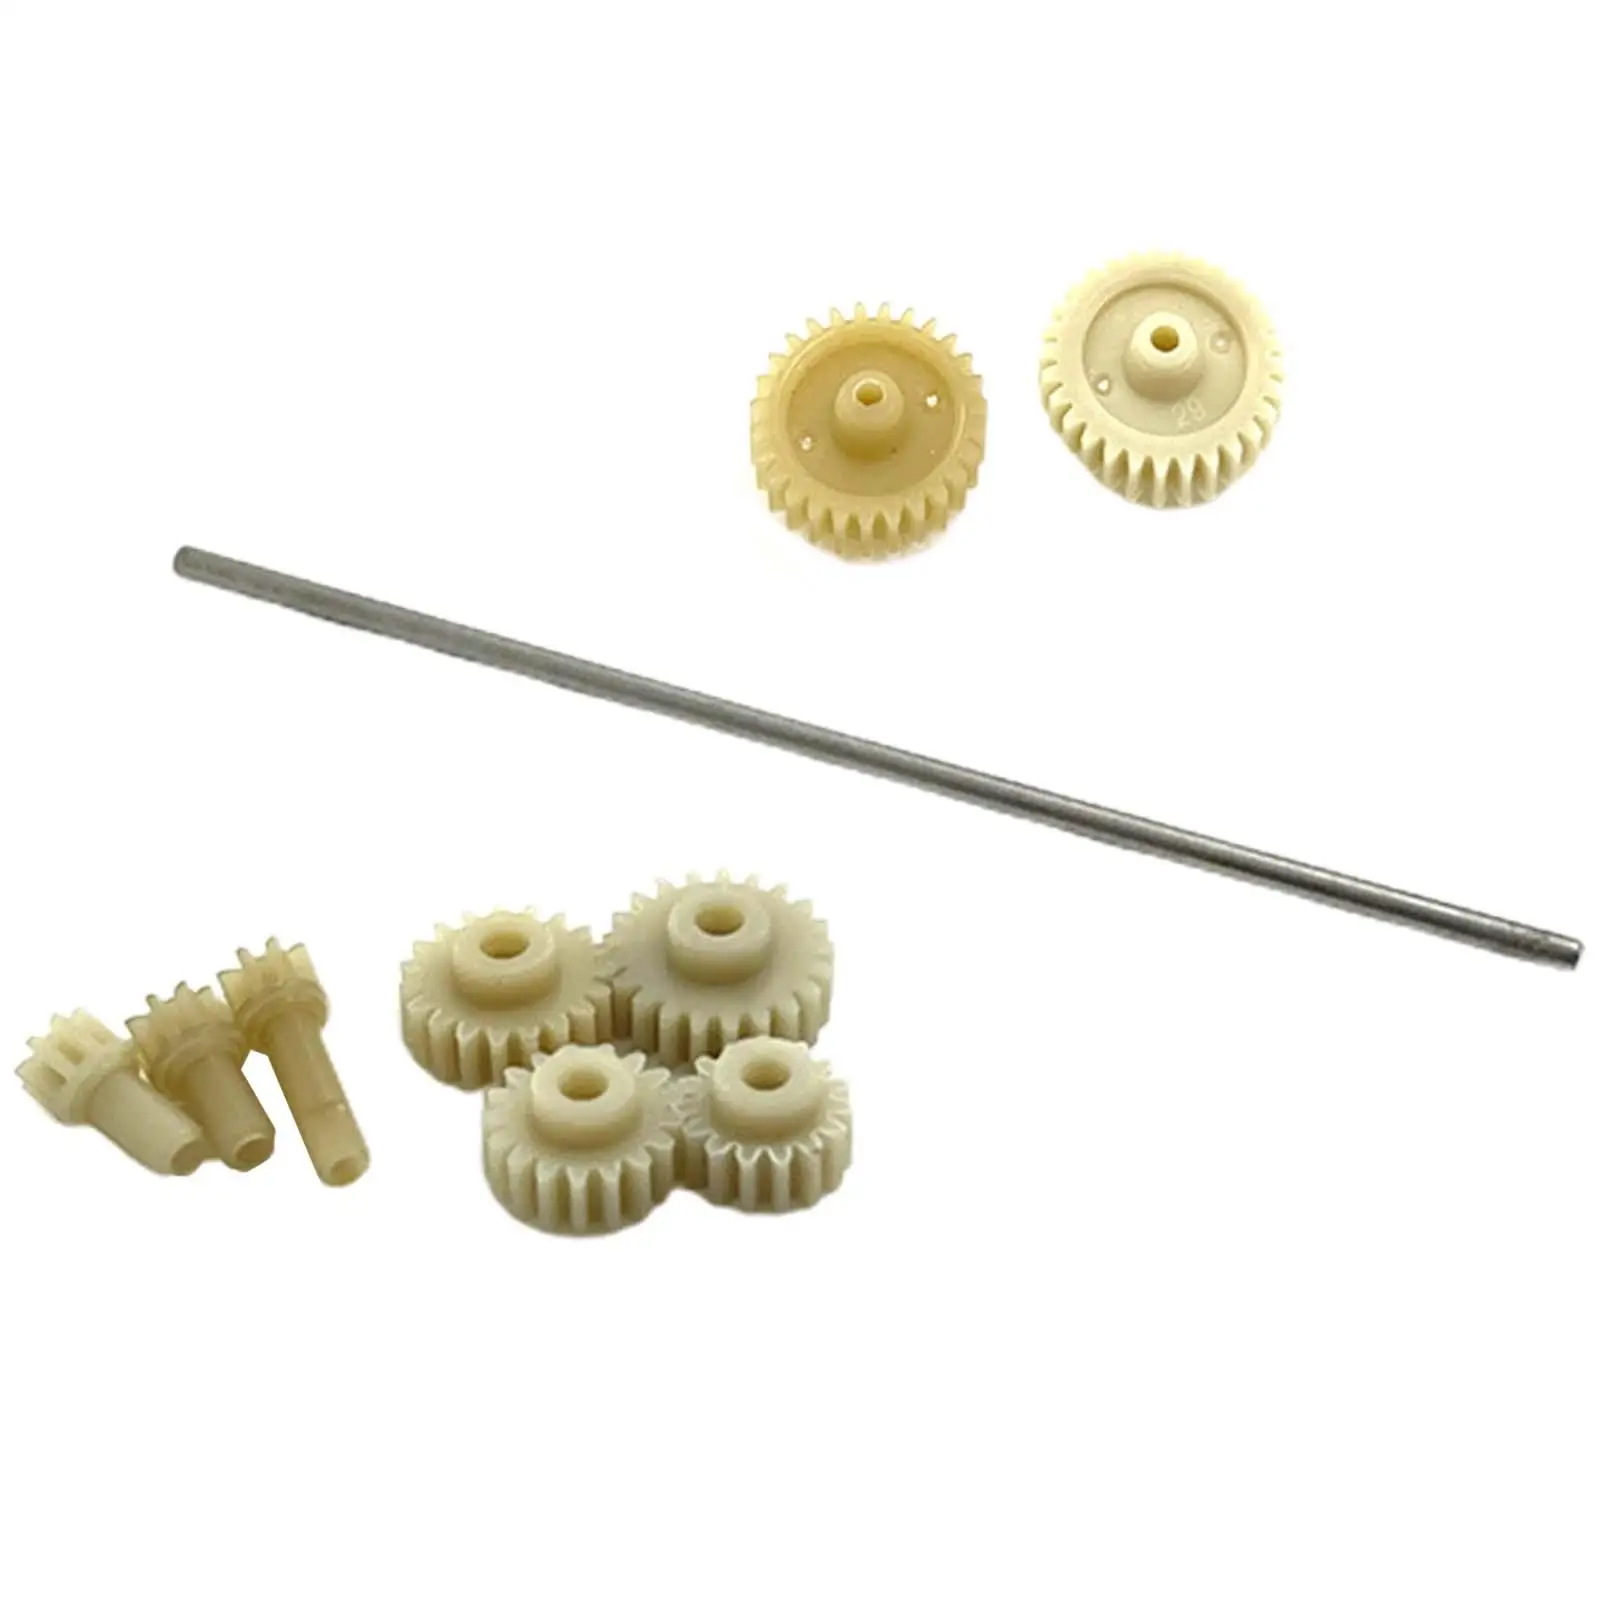 

RC Car Gears and Shaft Set Metal Center Drive Shaft for Wltoys 1/28 P929 P939 K969 K979 K989 284131 284161 284010 RC Car